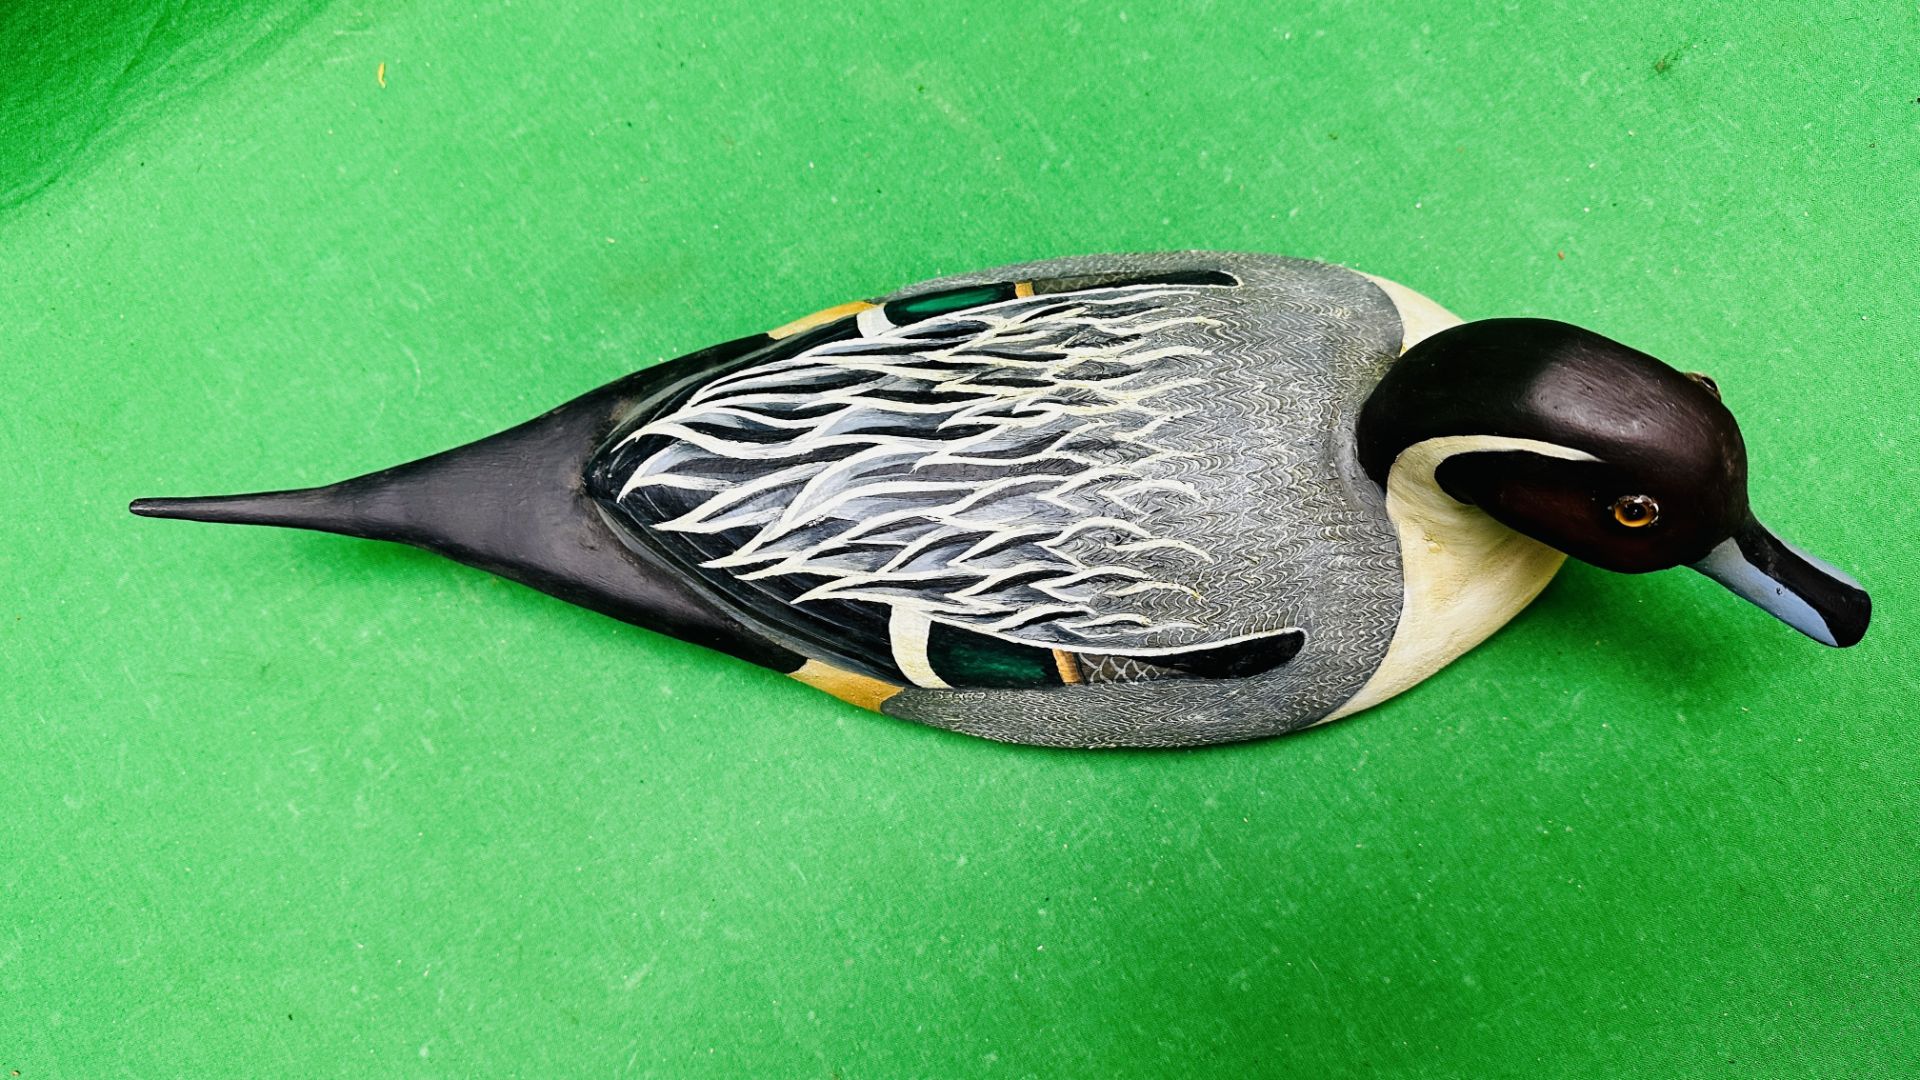 A HANDCRAFTED DUCK DECOY HAVING HANDPAINTED DETAIL AND GLASS EYES. - Image 5 of 10